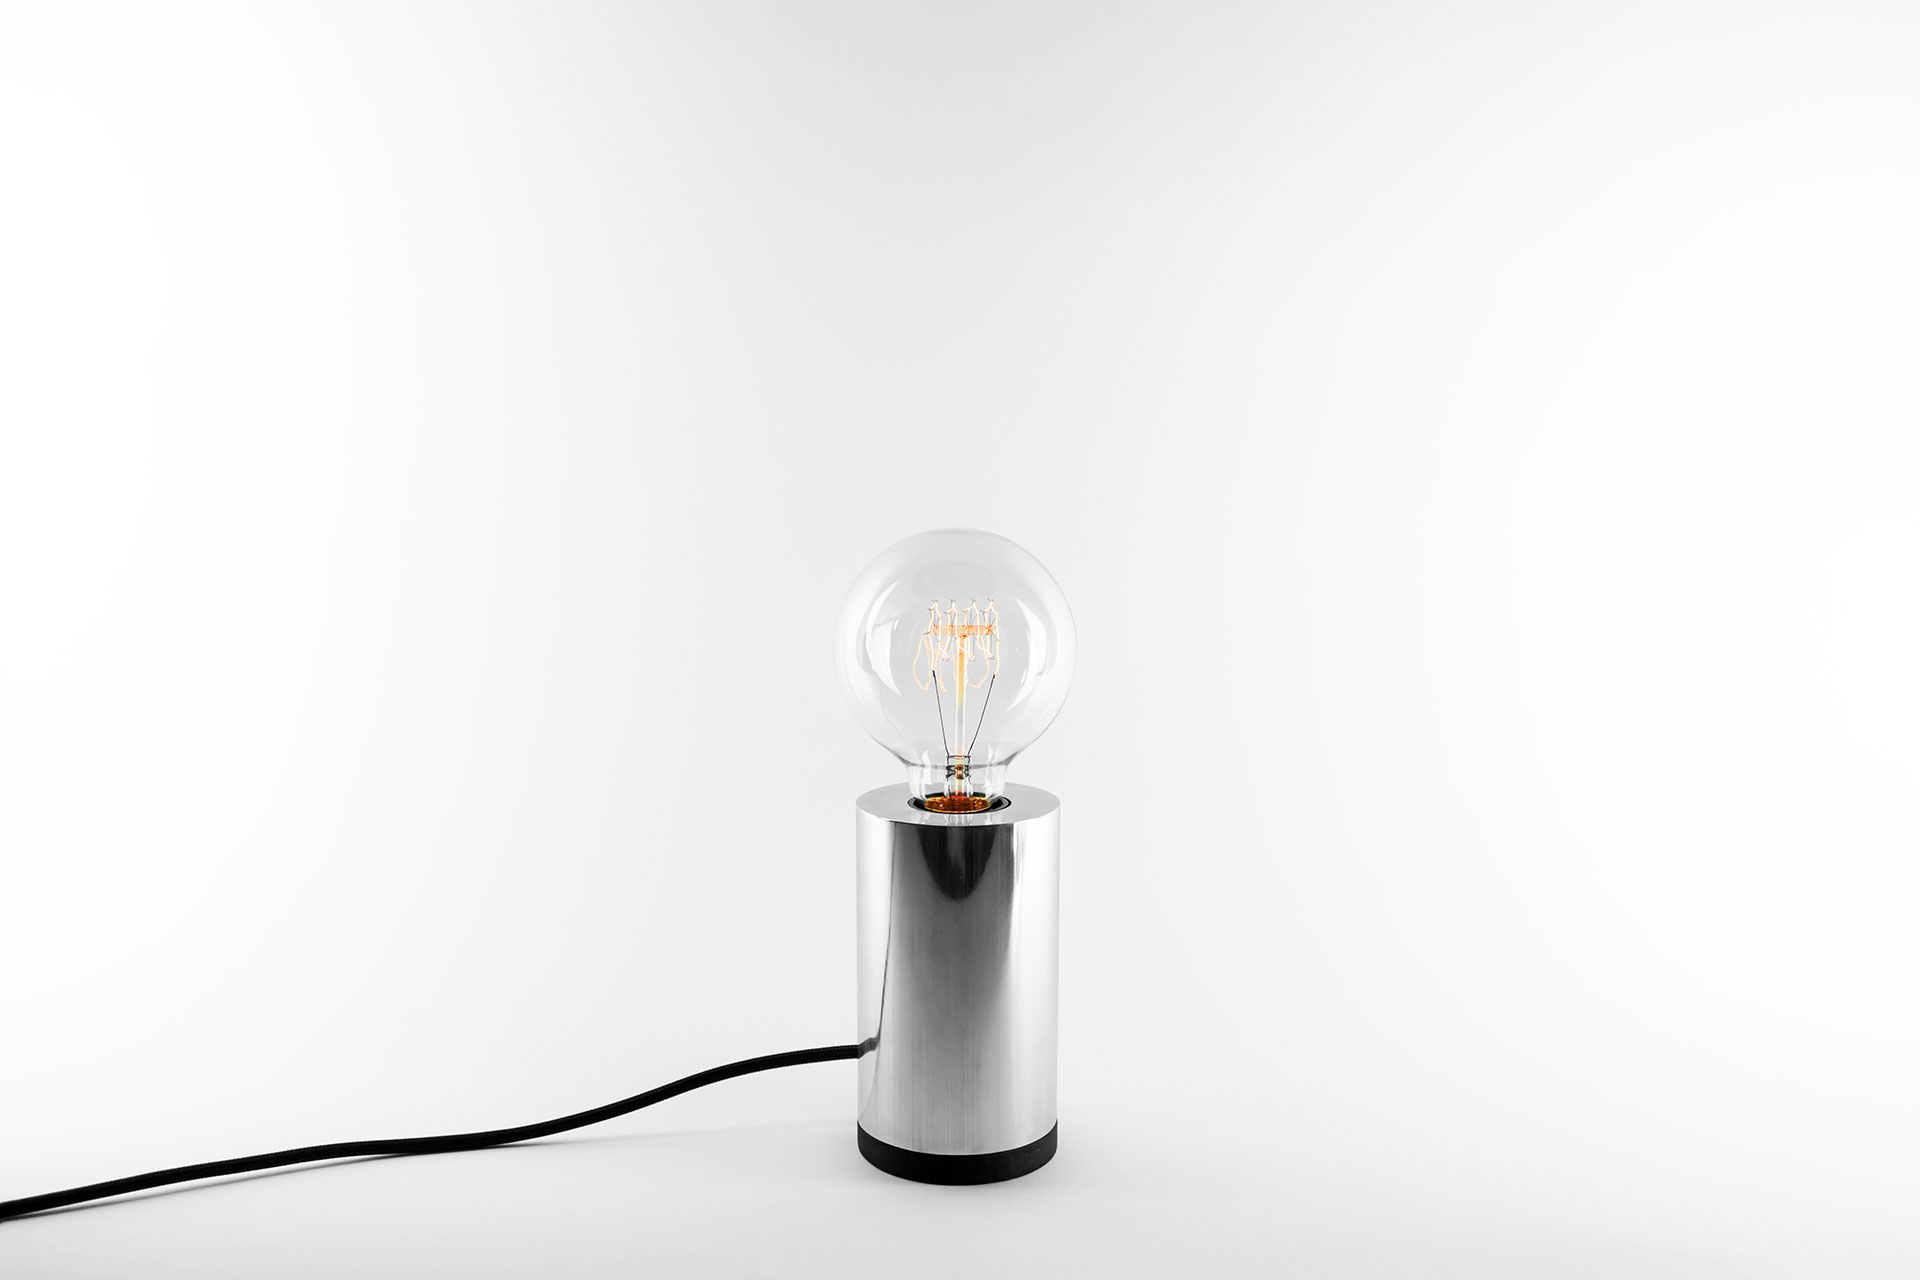 Dimmable bedside lamp in silver color with vinatge Edison bulb inapired by scandinavian design